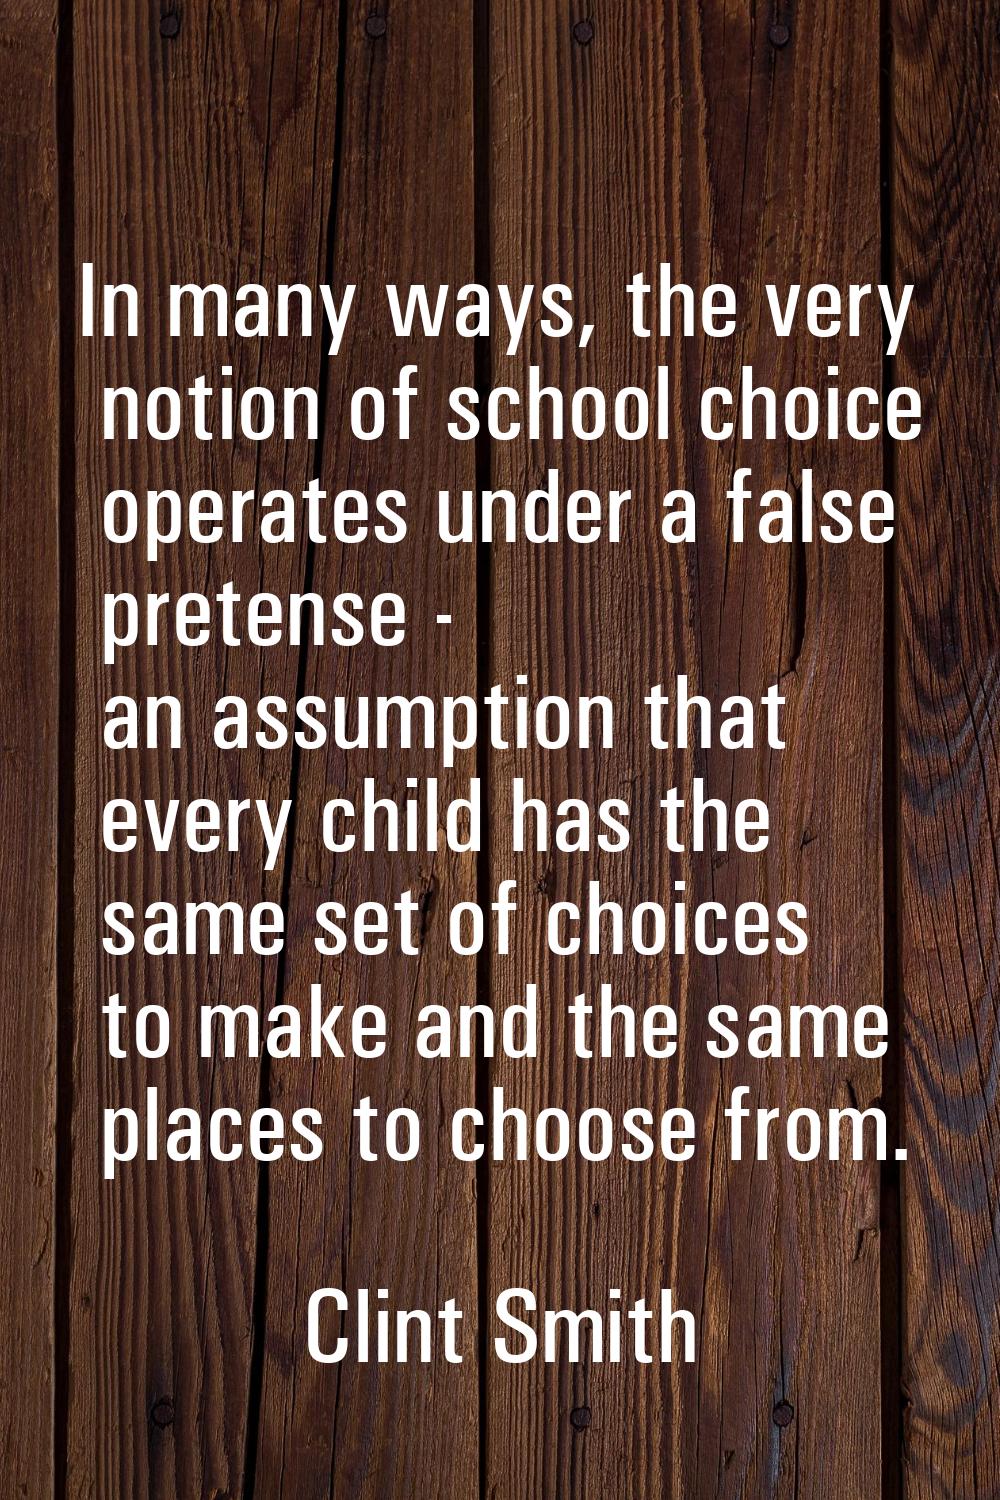 In many ways, the very notion of school choice operates under a false pretense - an assumption that